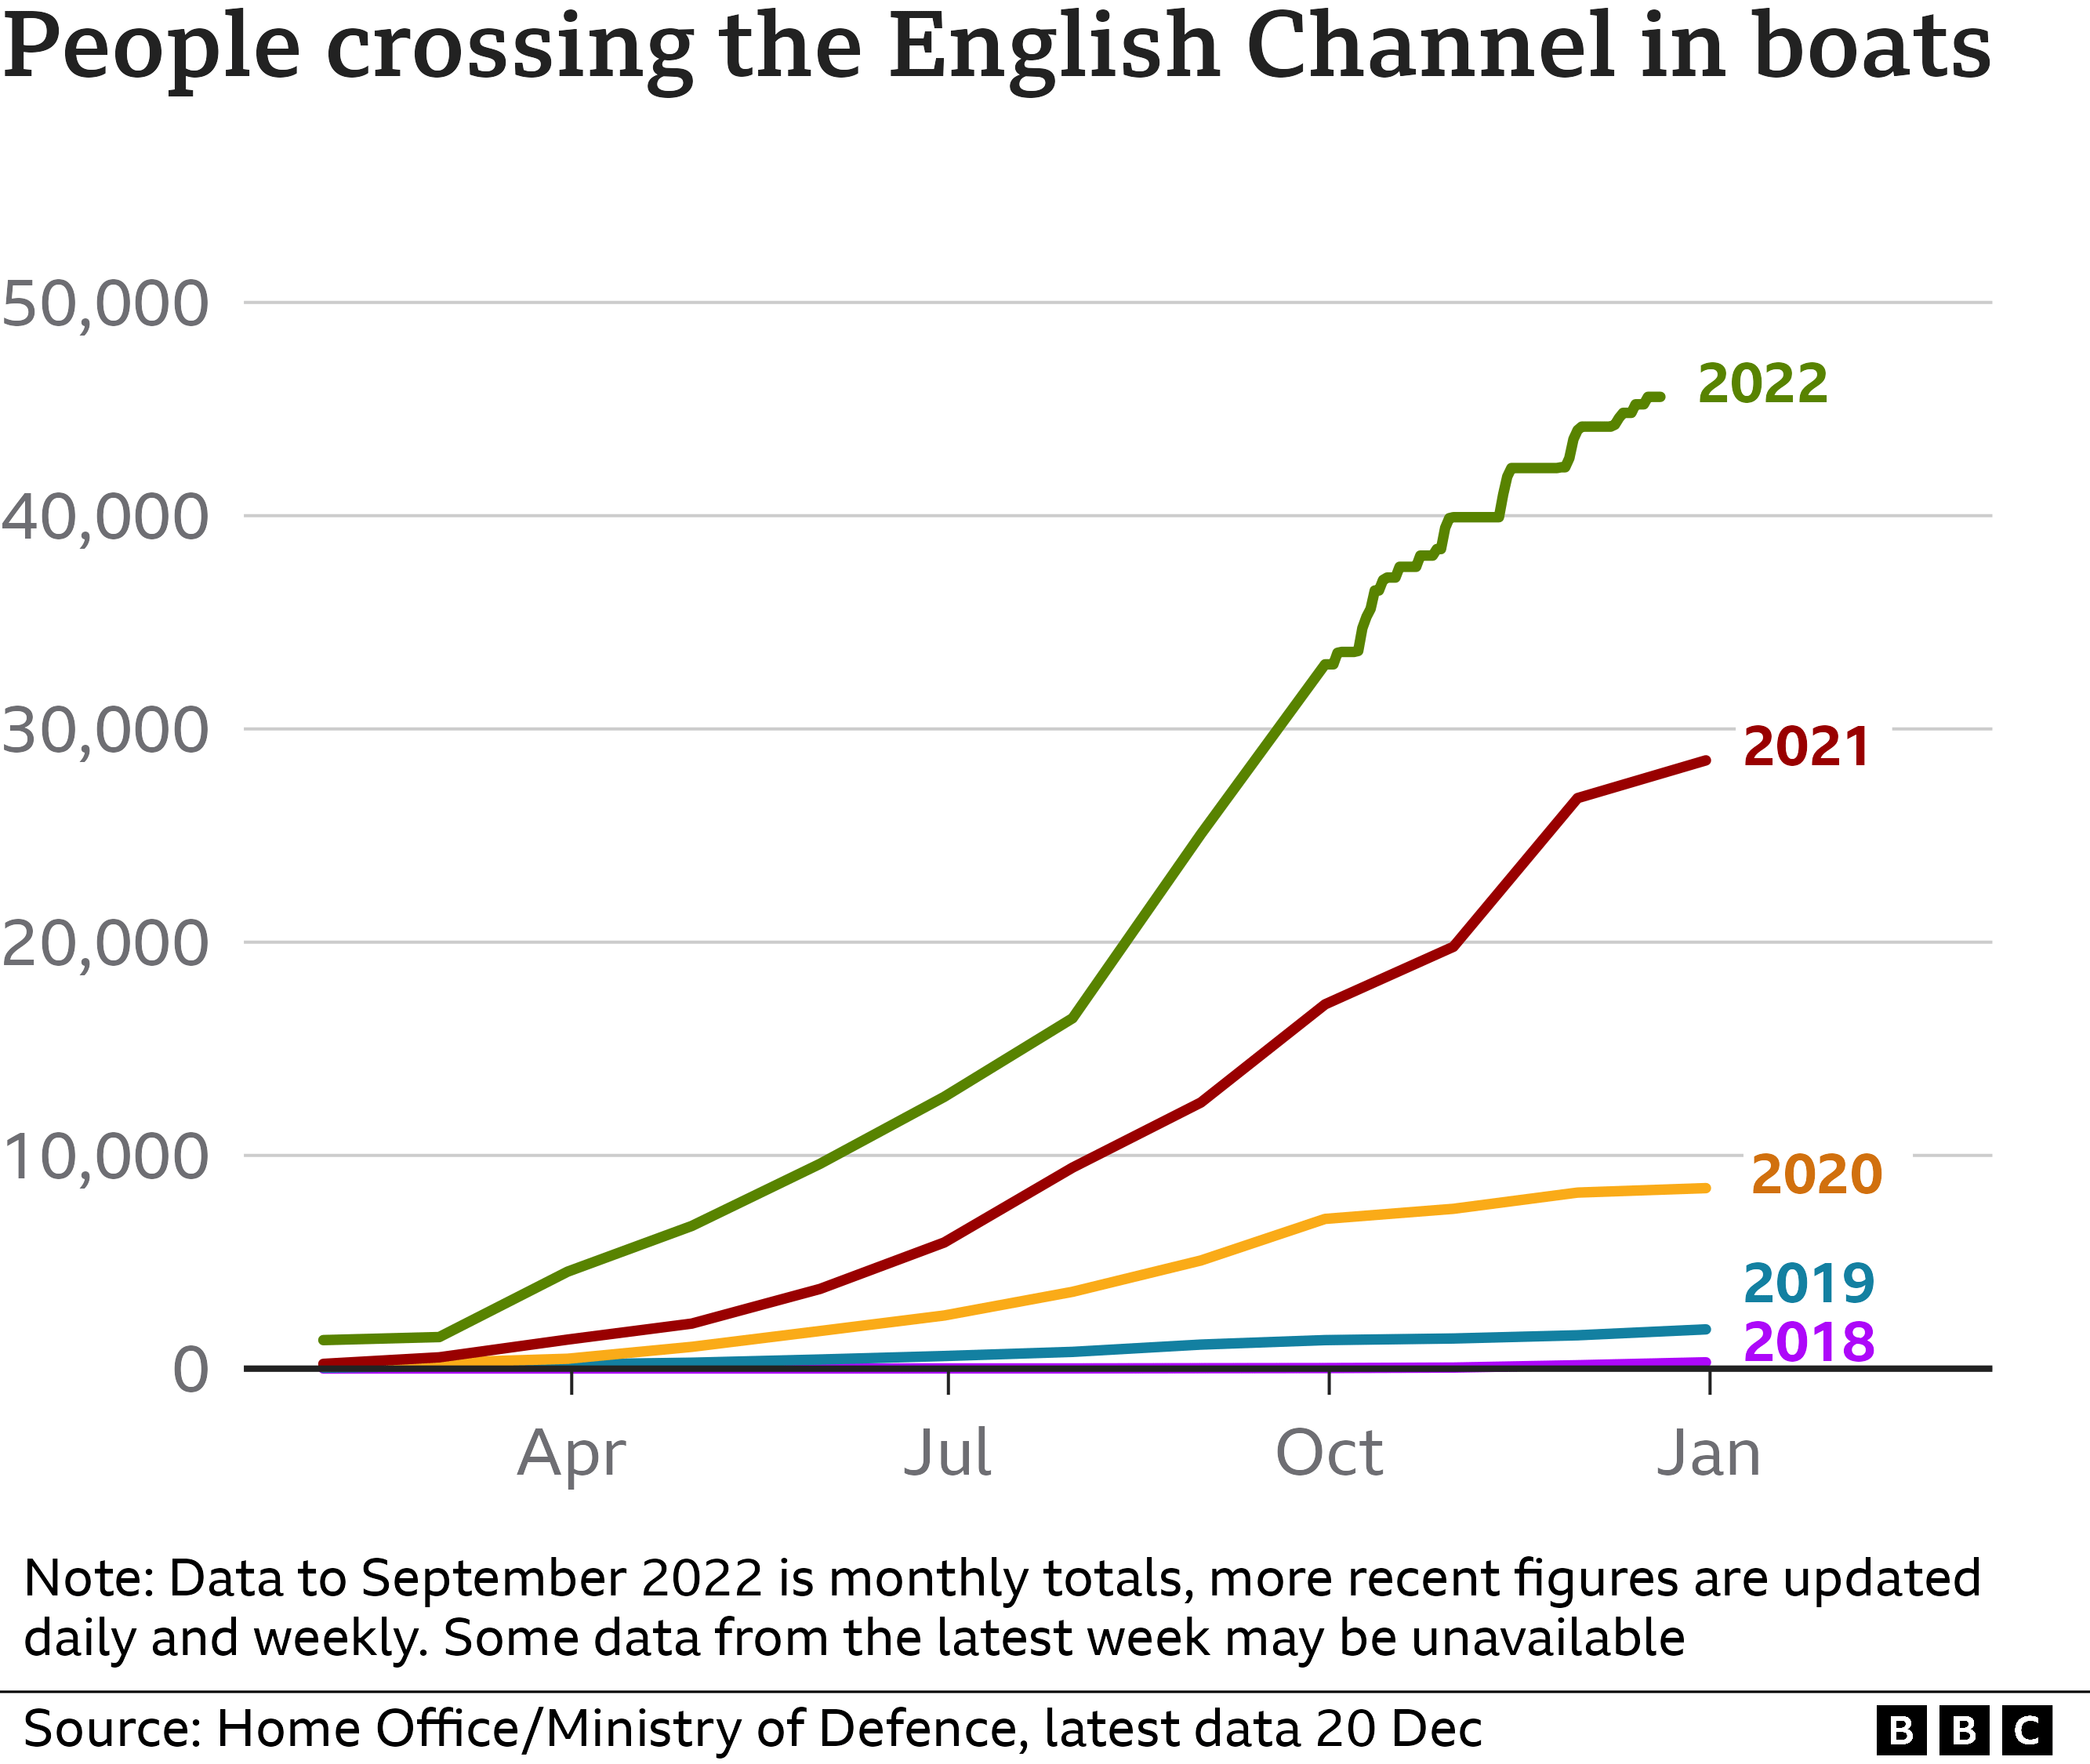 Chart showing number of people crossing the English Channel in 2018-2022, with numbers rising sharply in 2021 and 2022